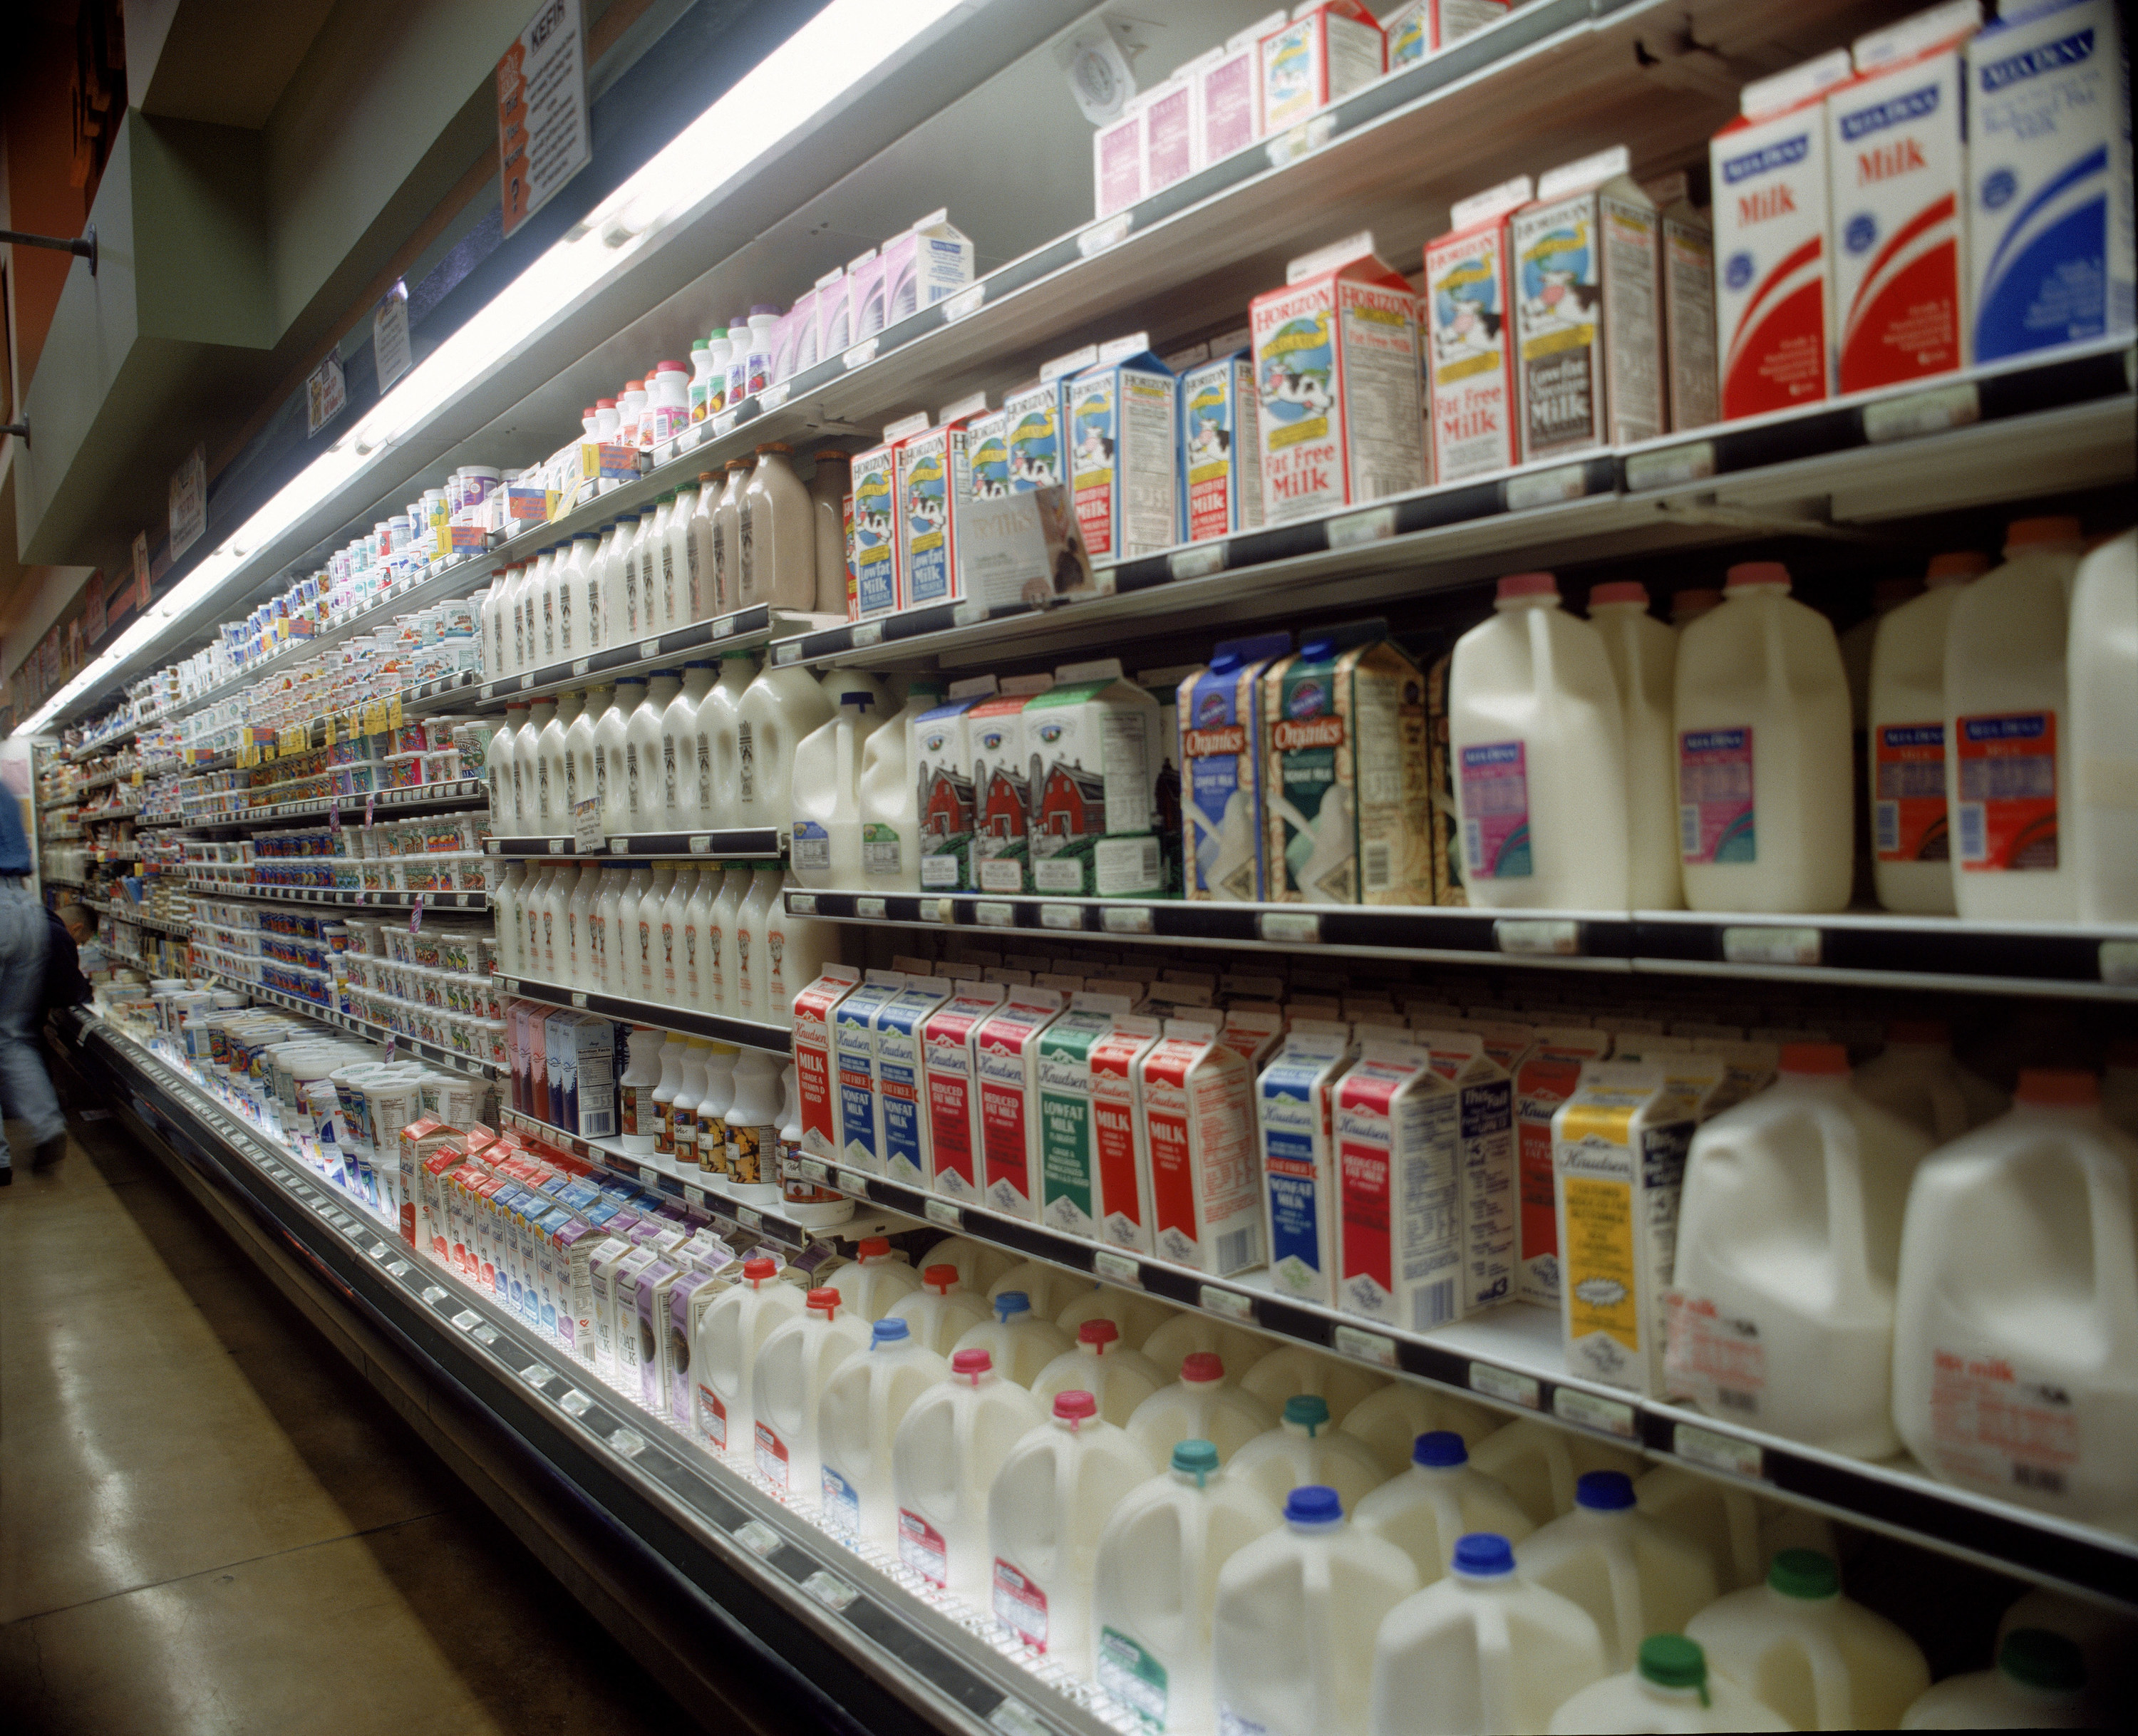 Dairy aisle in supermarket